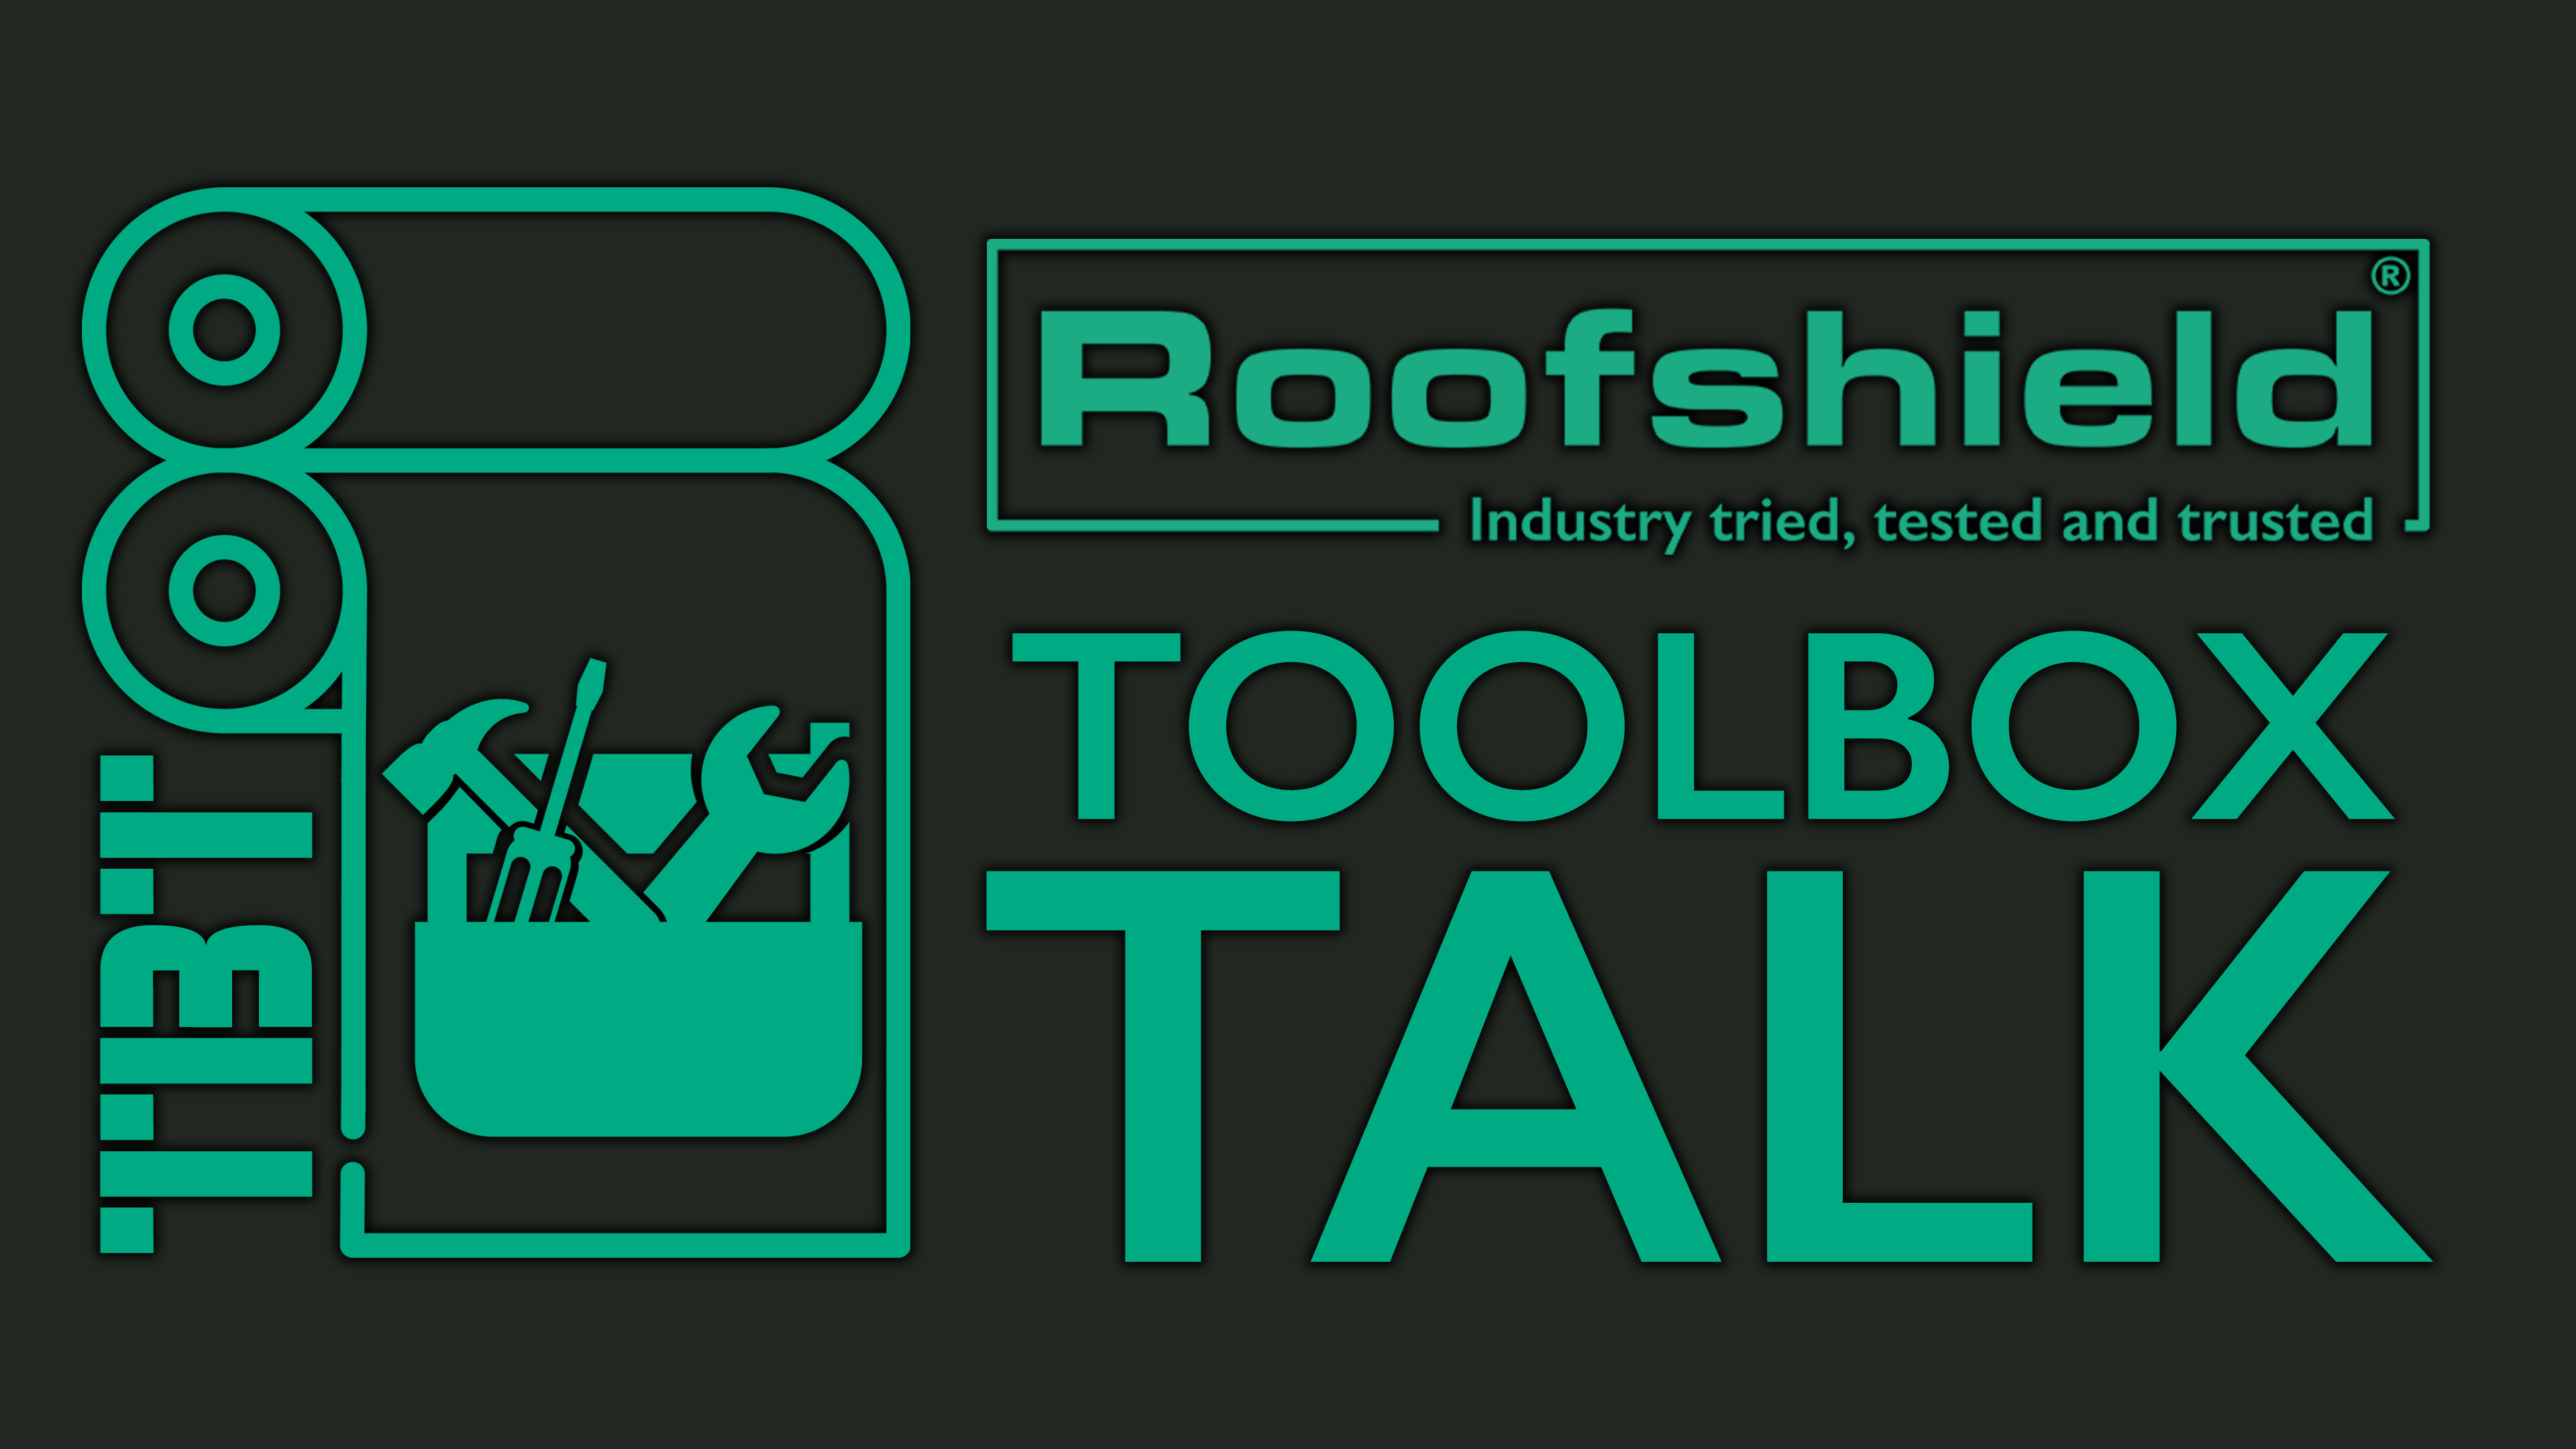 Welcome to our 30-minute webinar, "Roofshield Toolbox Talk". An overview of the practical application of the Roofshield air and vapour permeable pitched roof underlay, it's performance benefits, and best practice for site installations. This webinar is followed by A Live Zoom Q&A session with special Guest Keith Soulsby former Managing Director of Wensley Roofing, current Group Operations Director of Northern Bear PLC and our panel of Technical experts.